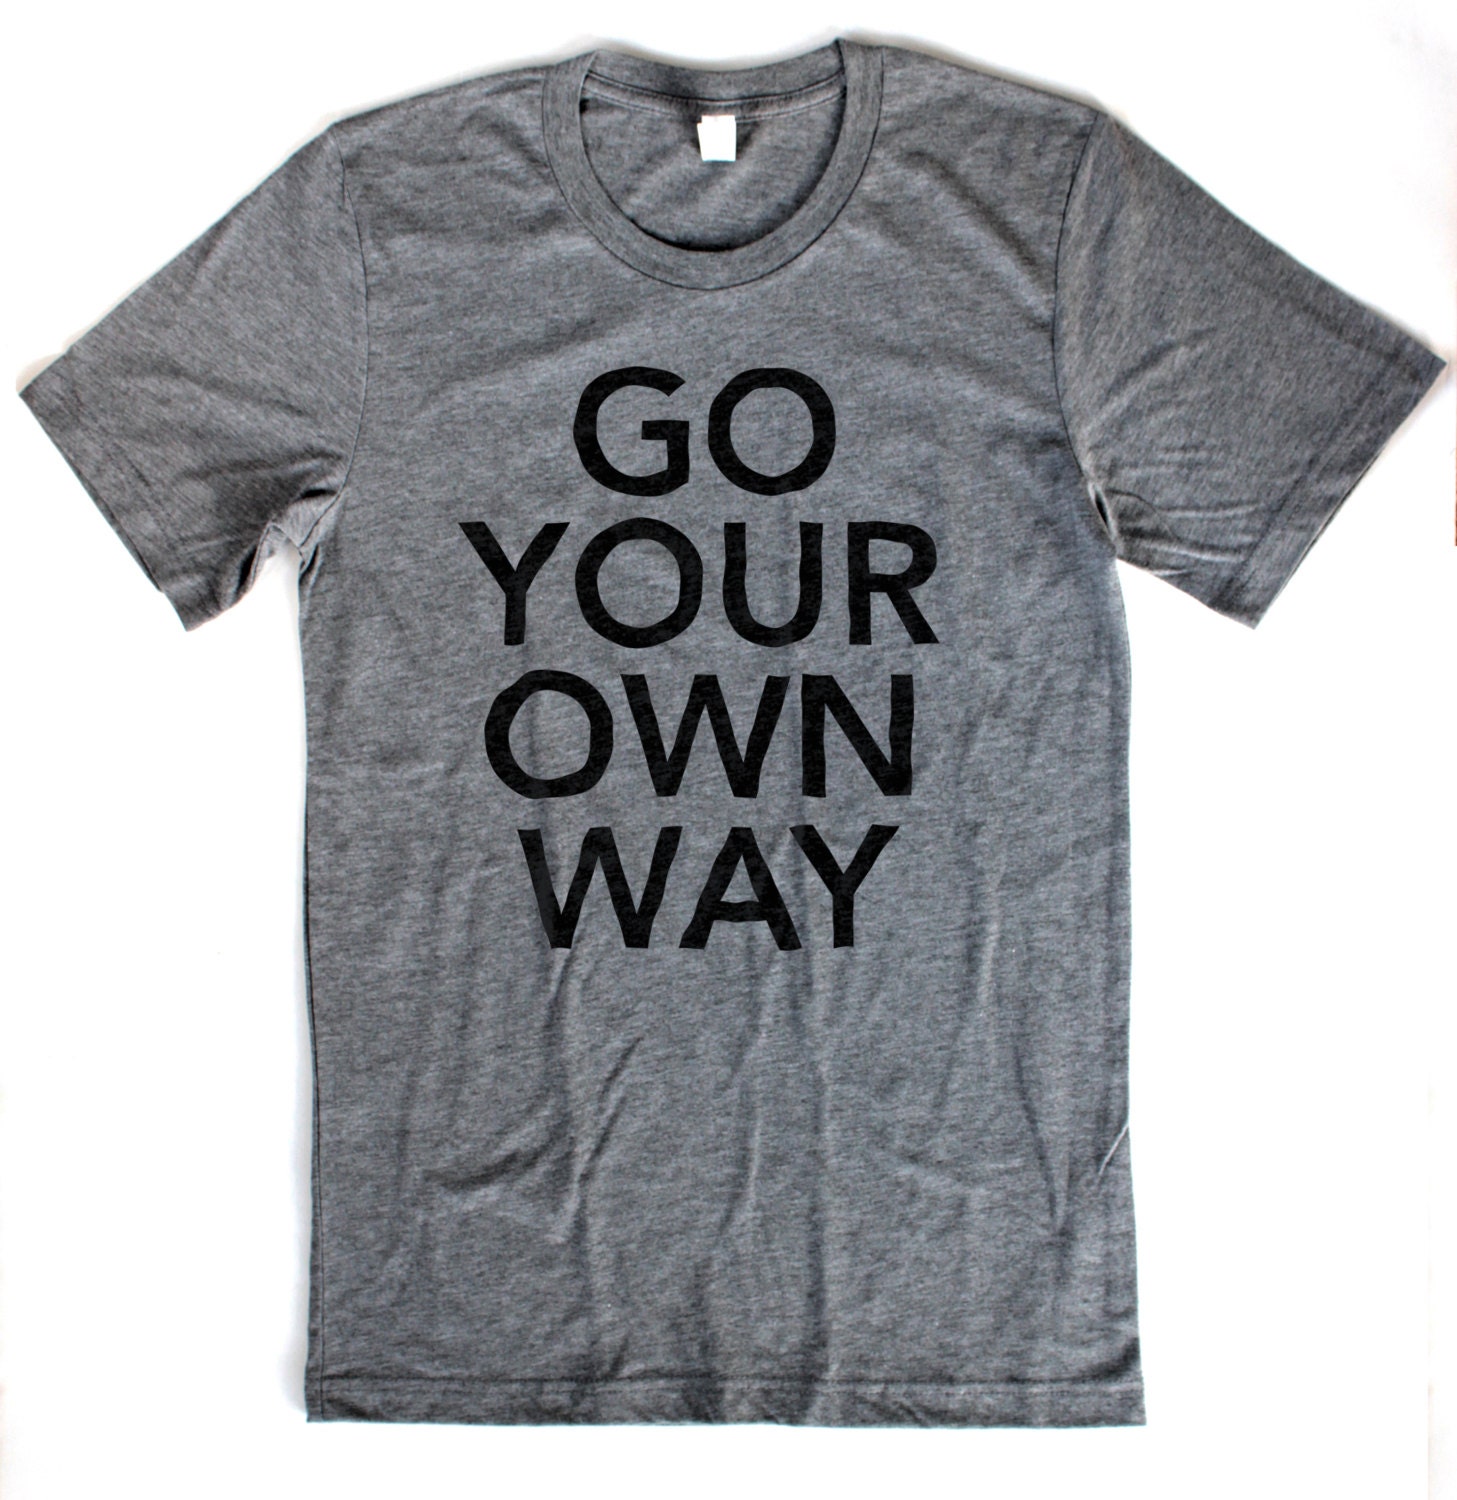 Go Your Own Way T-Shirt UNISEX/MENS Available in S M L XL | Etsy